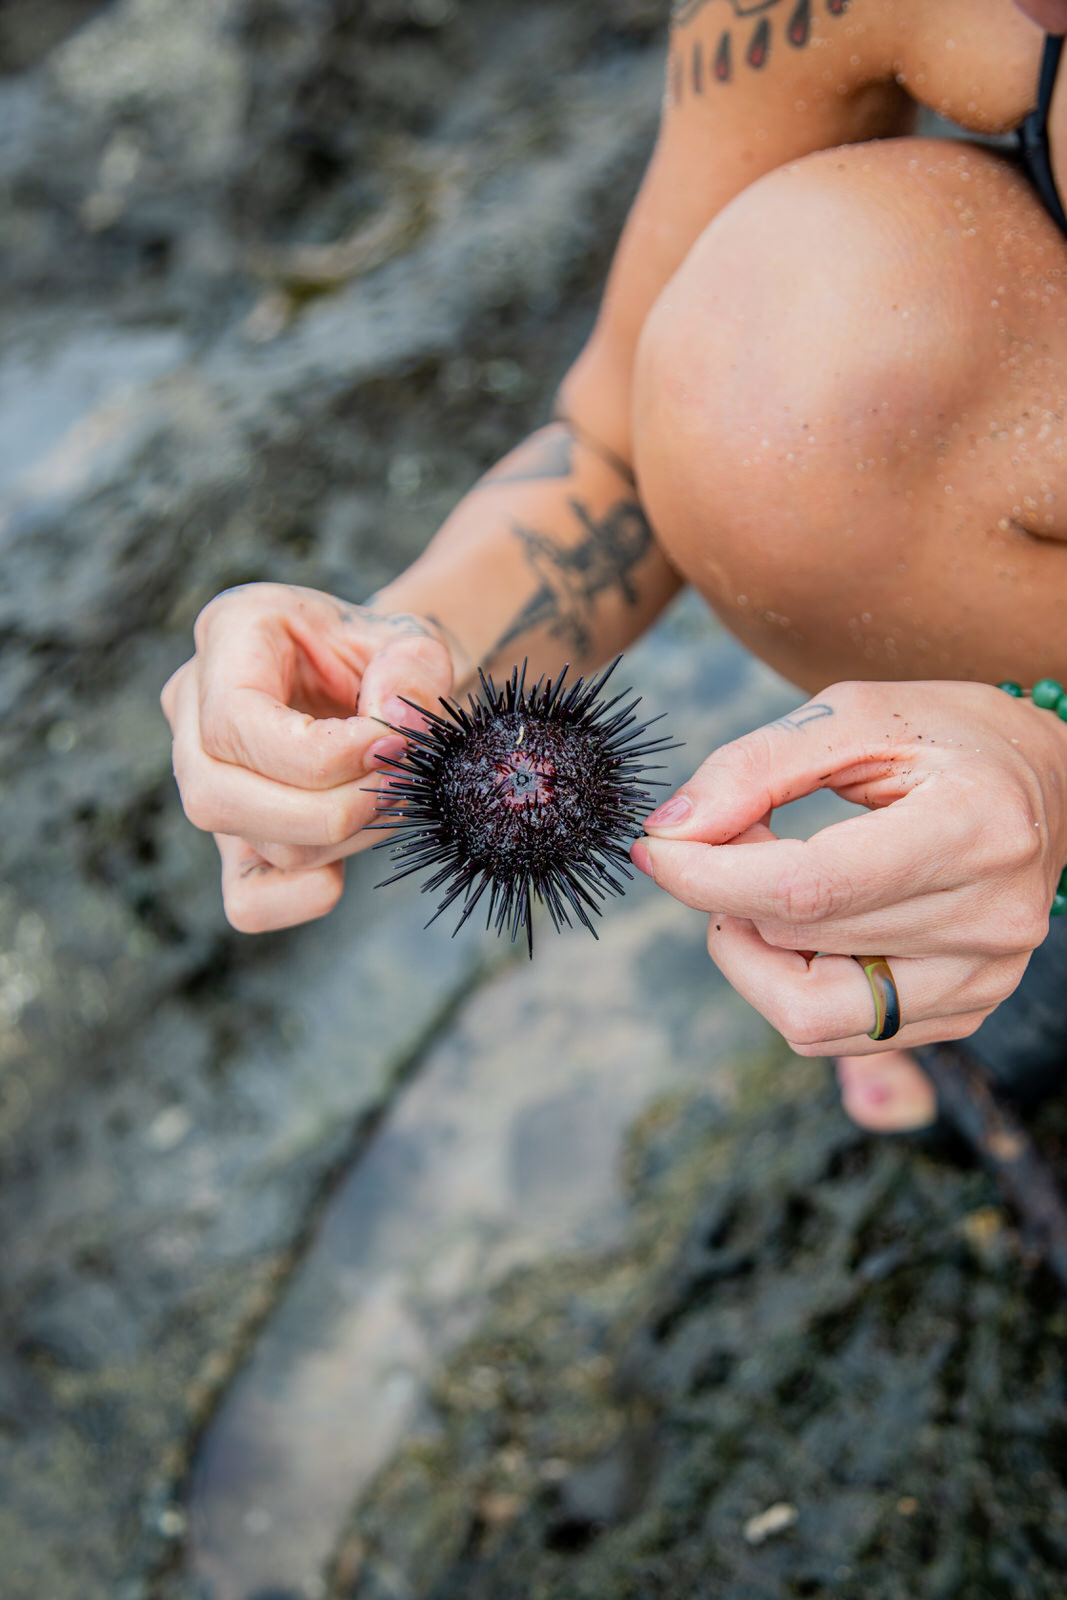 Hands holding the spines of a sea urchin in Coast Rica